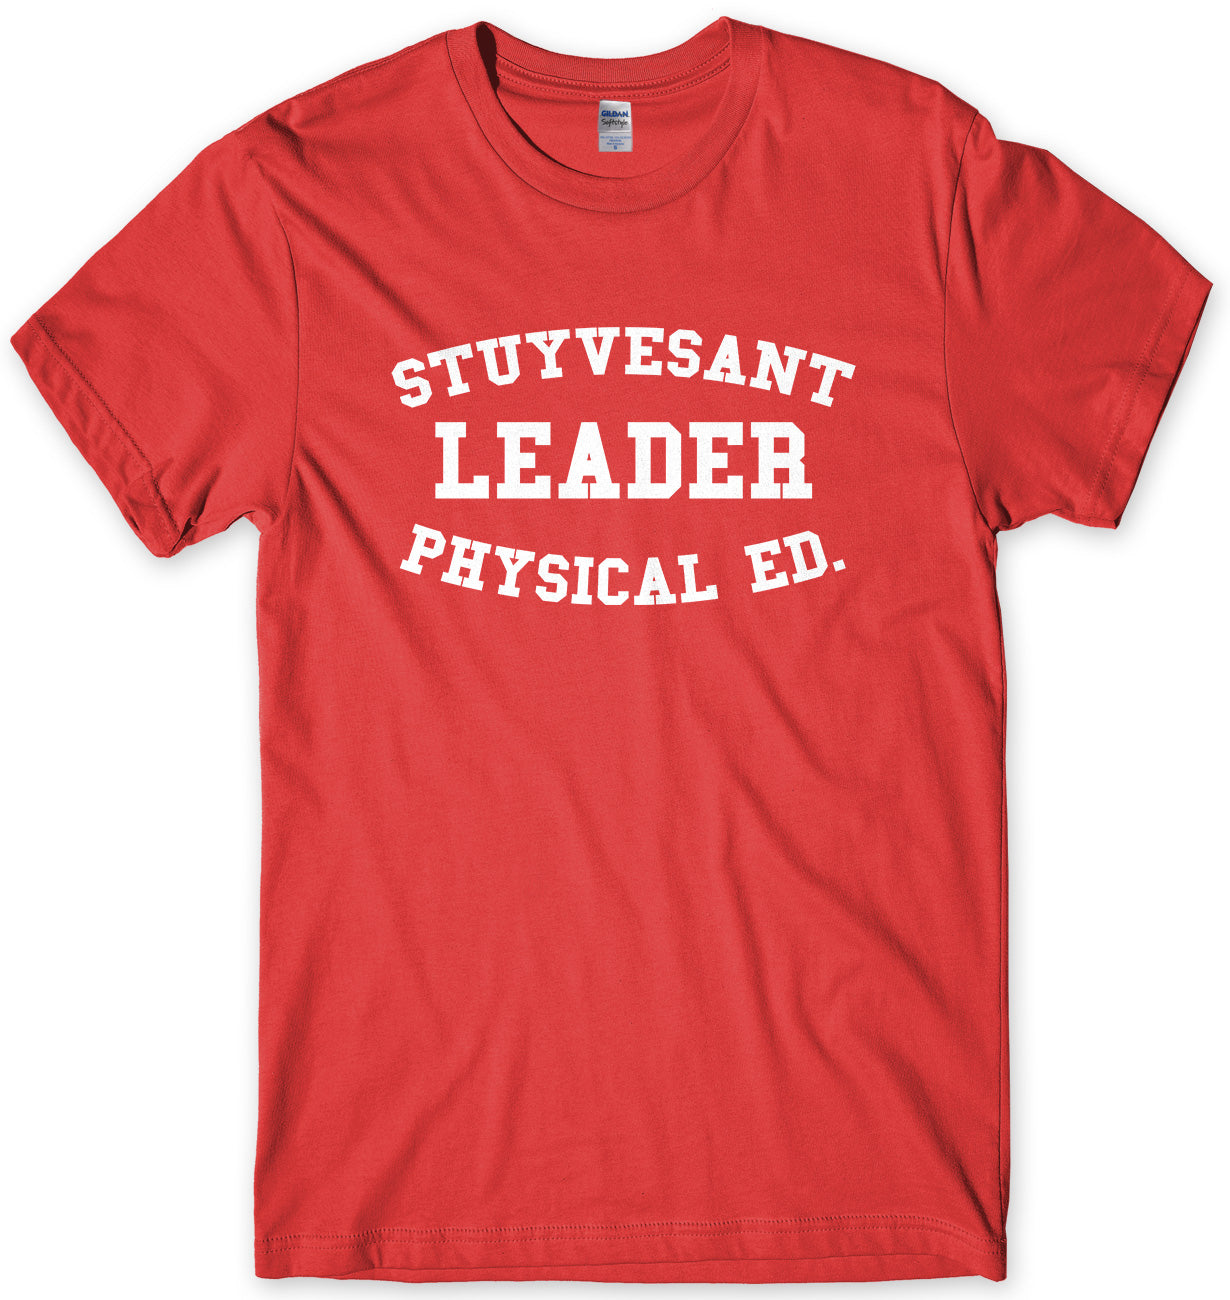 STUYVESANT LEADER PHYSICAL EDUCATION AS WORN BY AD ROCK MENS UNISEX T-SHIRT